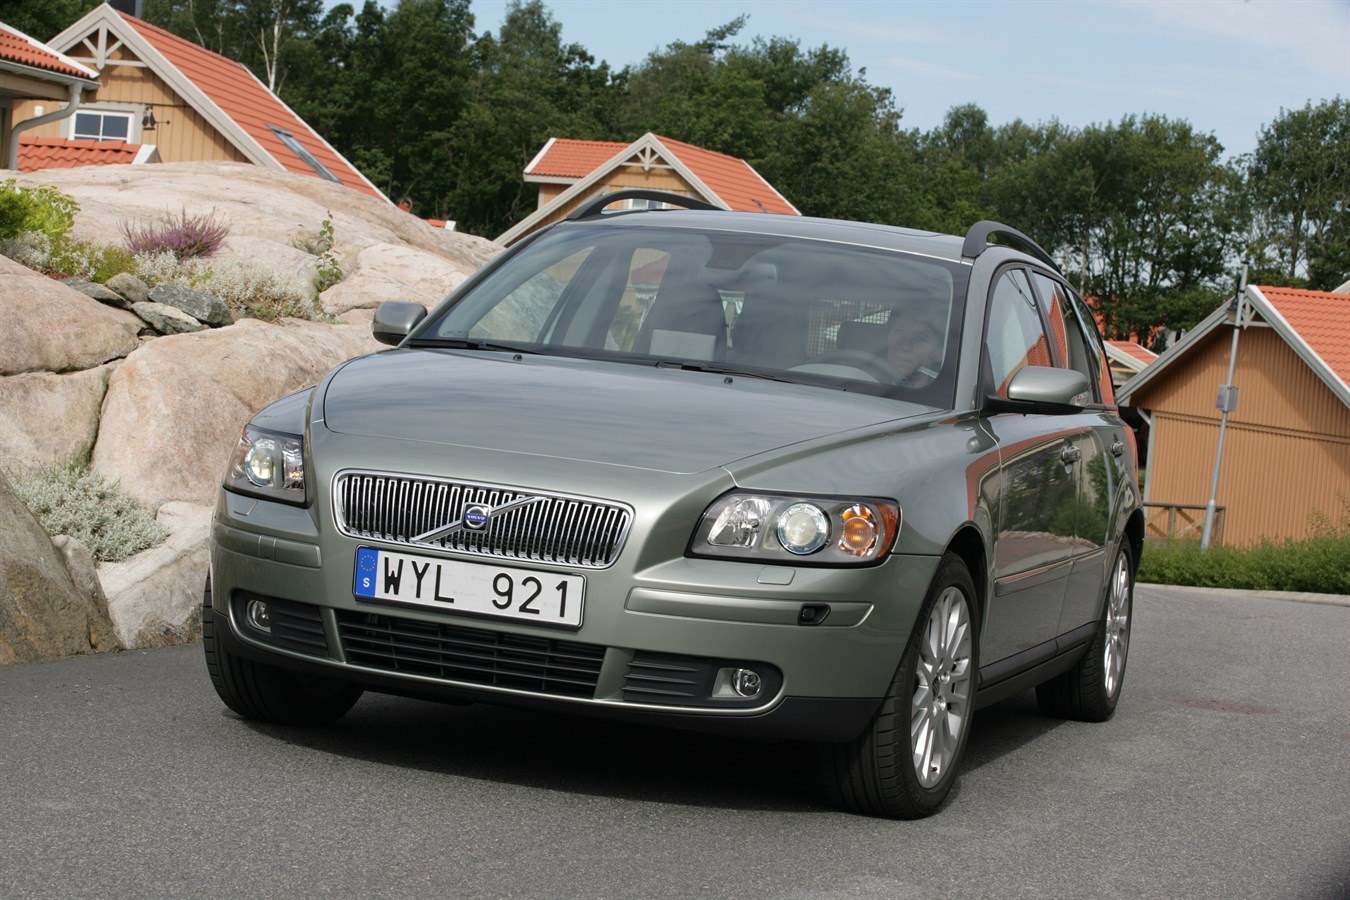 V50, FlexiFuel (available in Sweden)